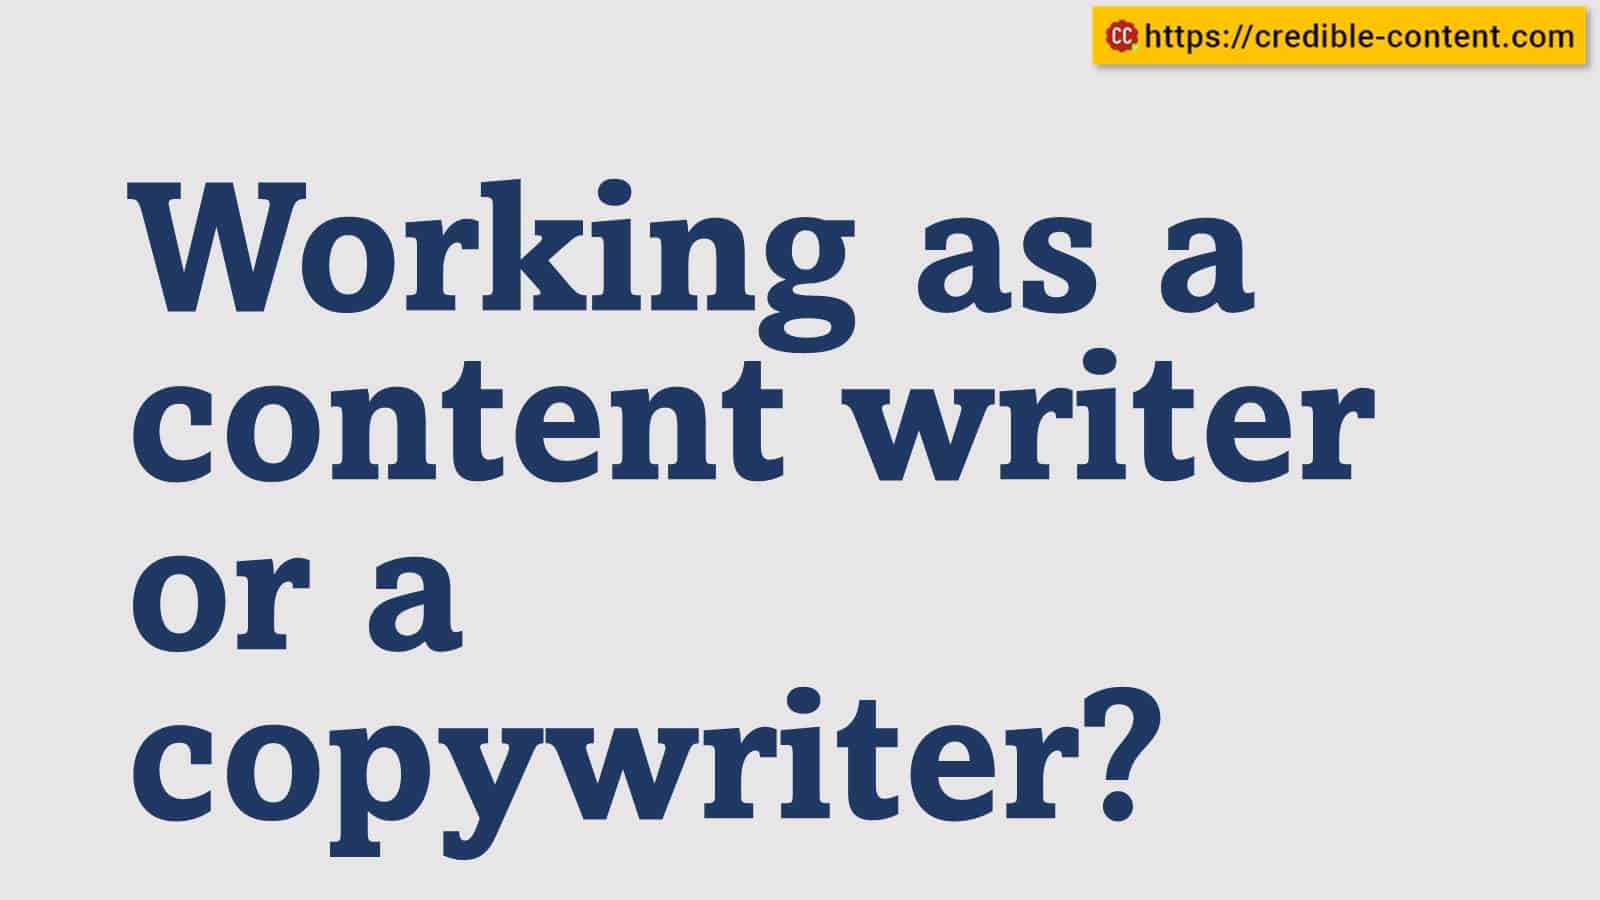 Working as a content writer or a copywriter?